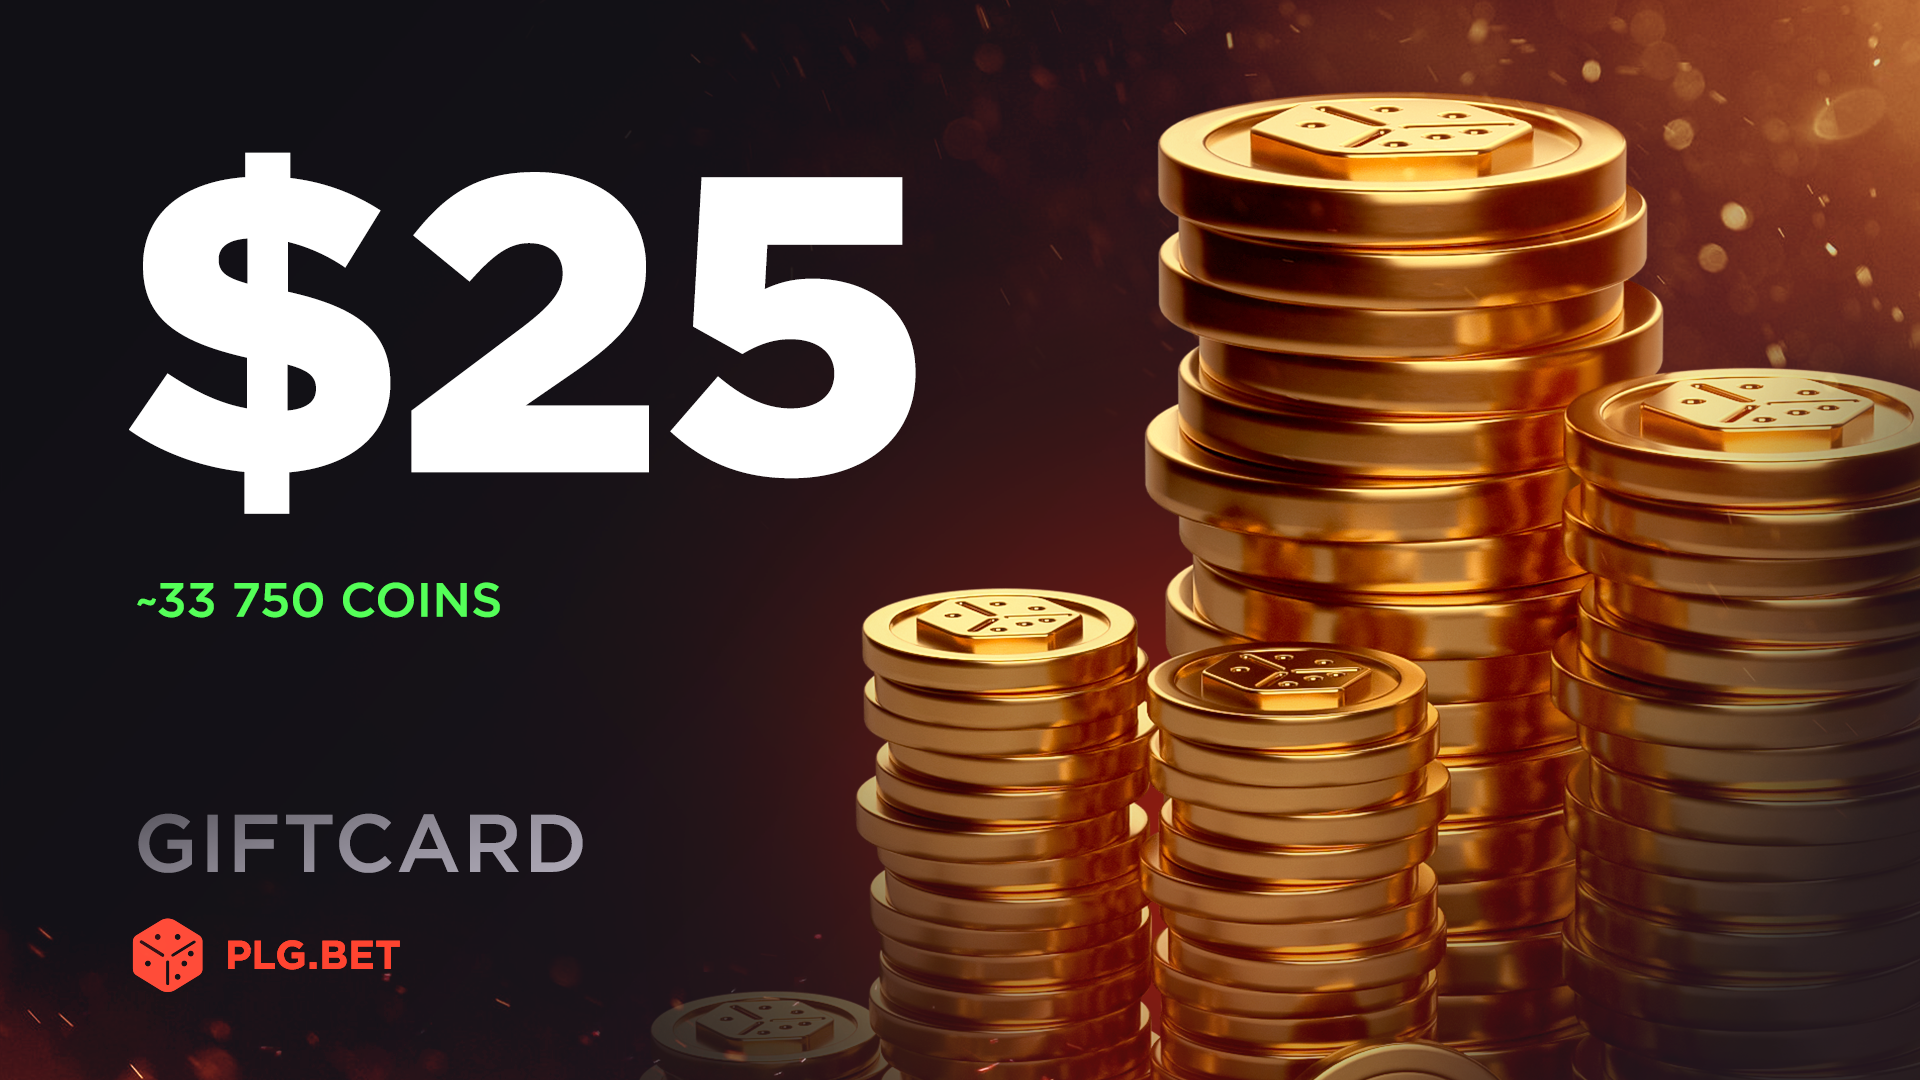 PLG.BET $25 Gift Card, 26.78 usd